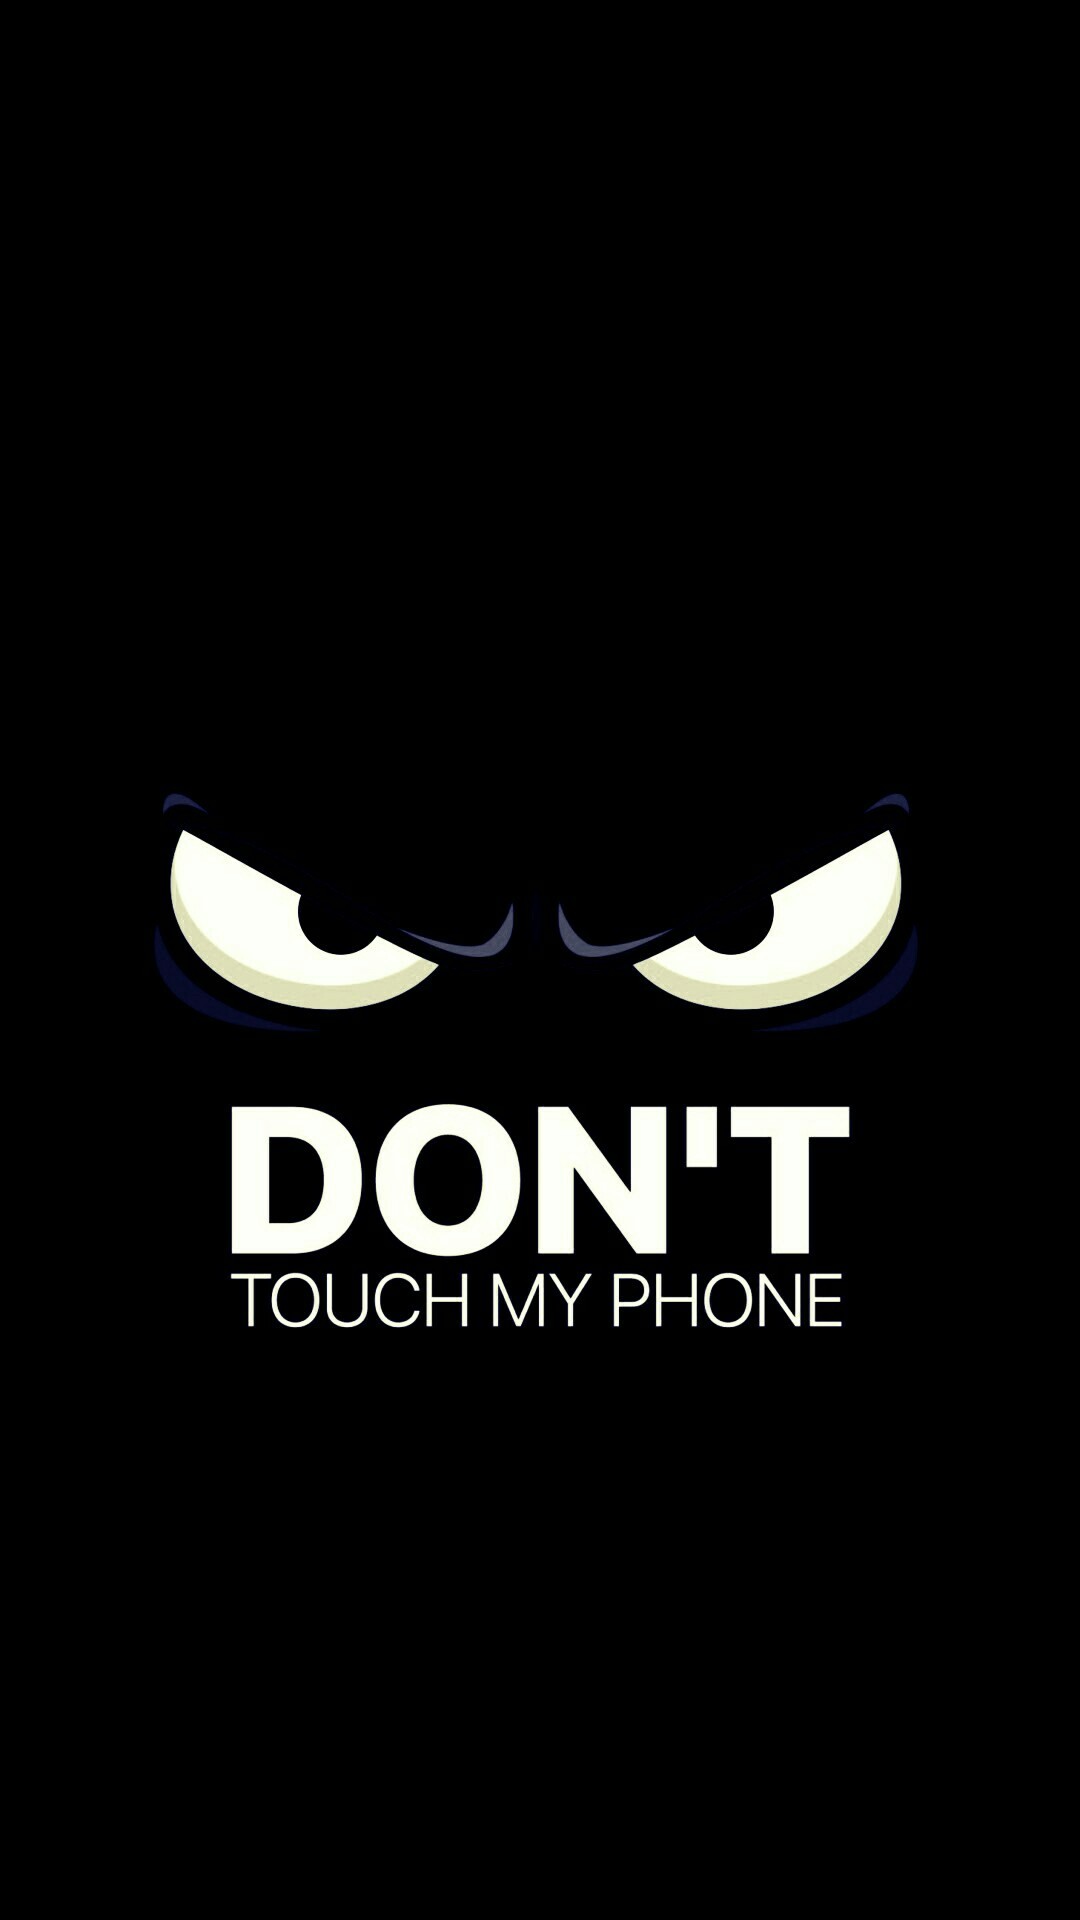 Anime wallpaper  Dont touch my phone wallpaper  Facebook